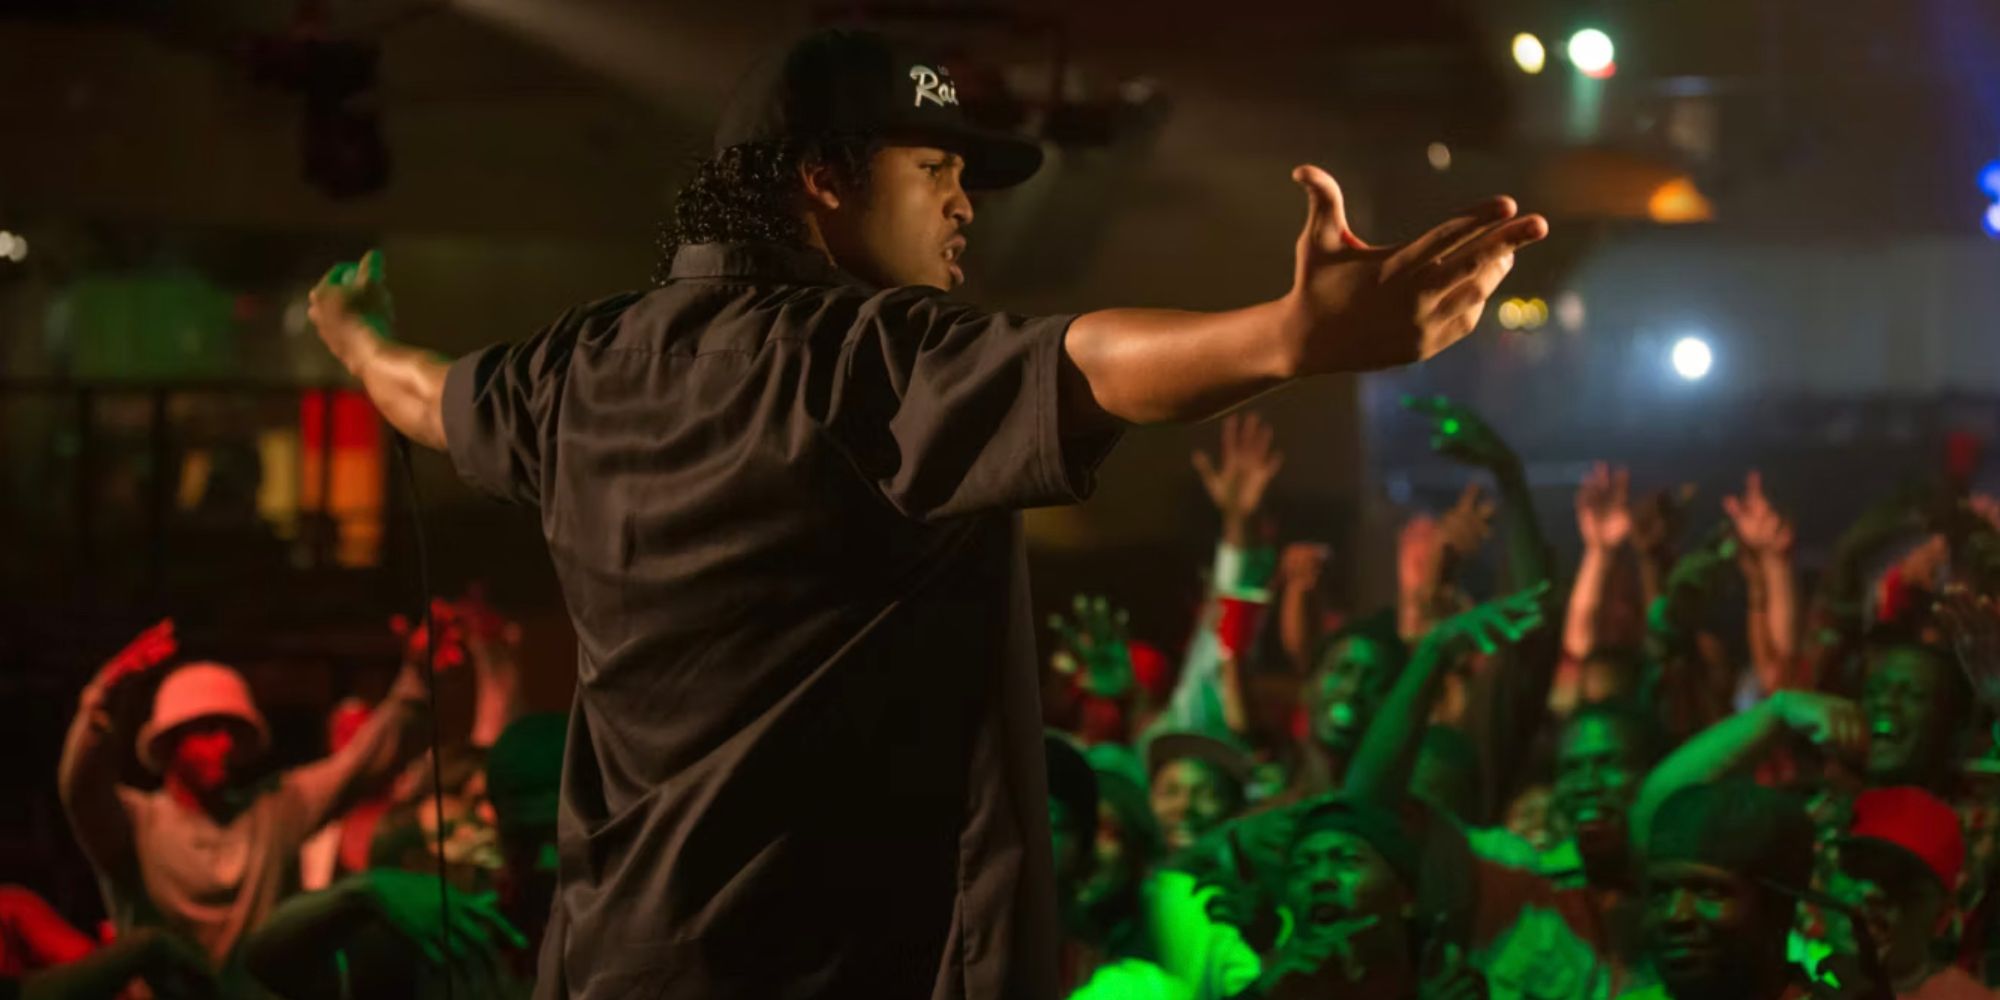 Ice Cube on stage hyping up the crowd in Straight OUtta Compton